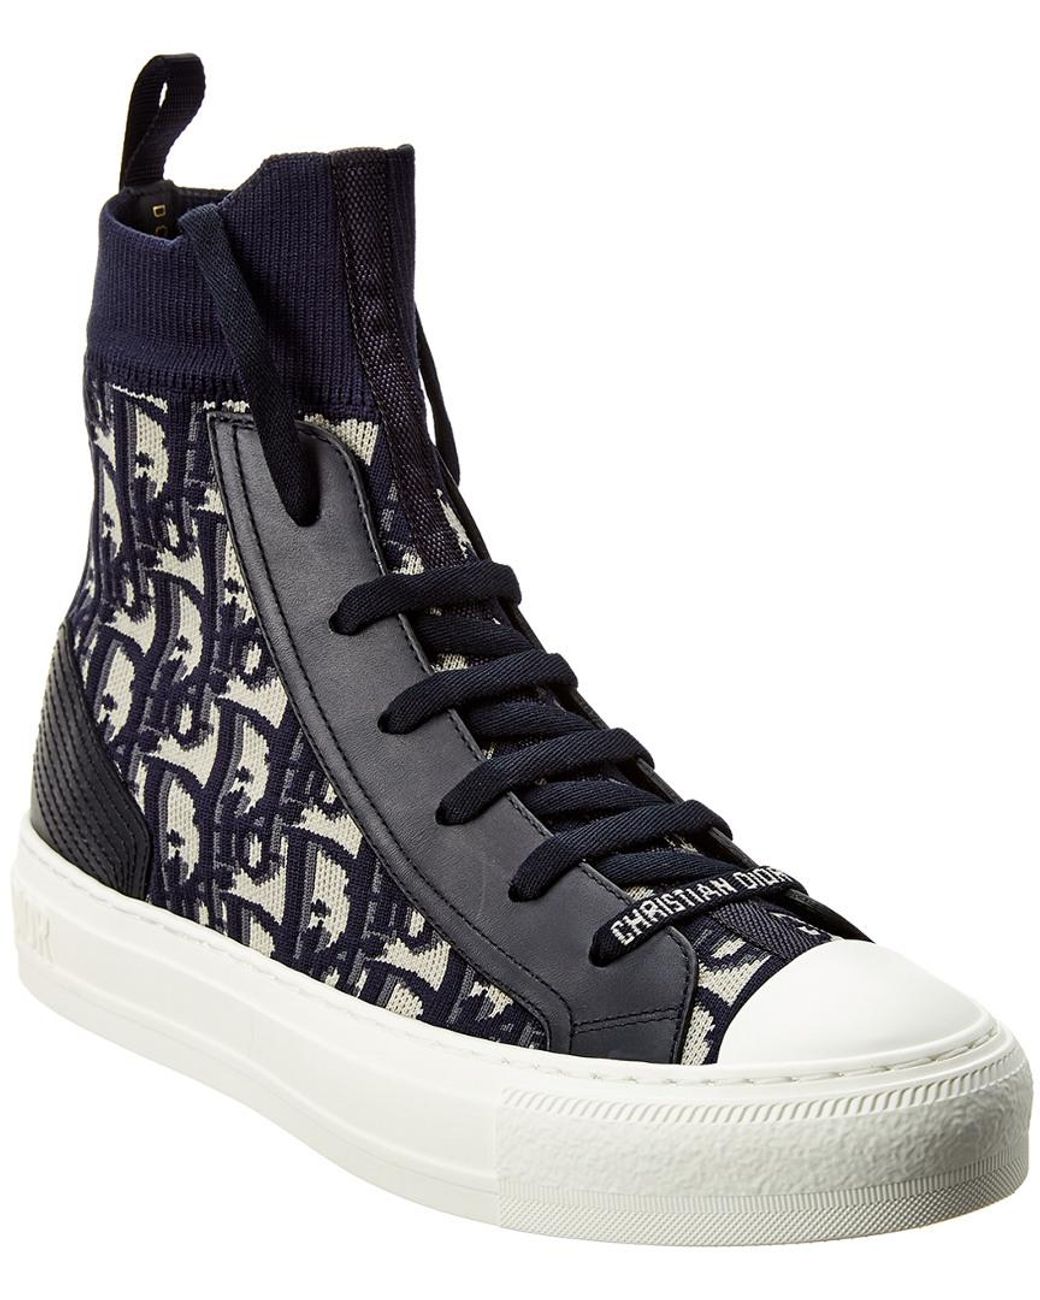 B23 HighTop Sneaker Black and White Dior Oblique Canvas with Black  Calfskin  DIOR